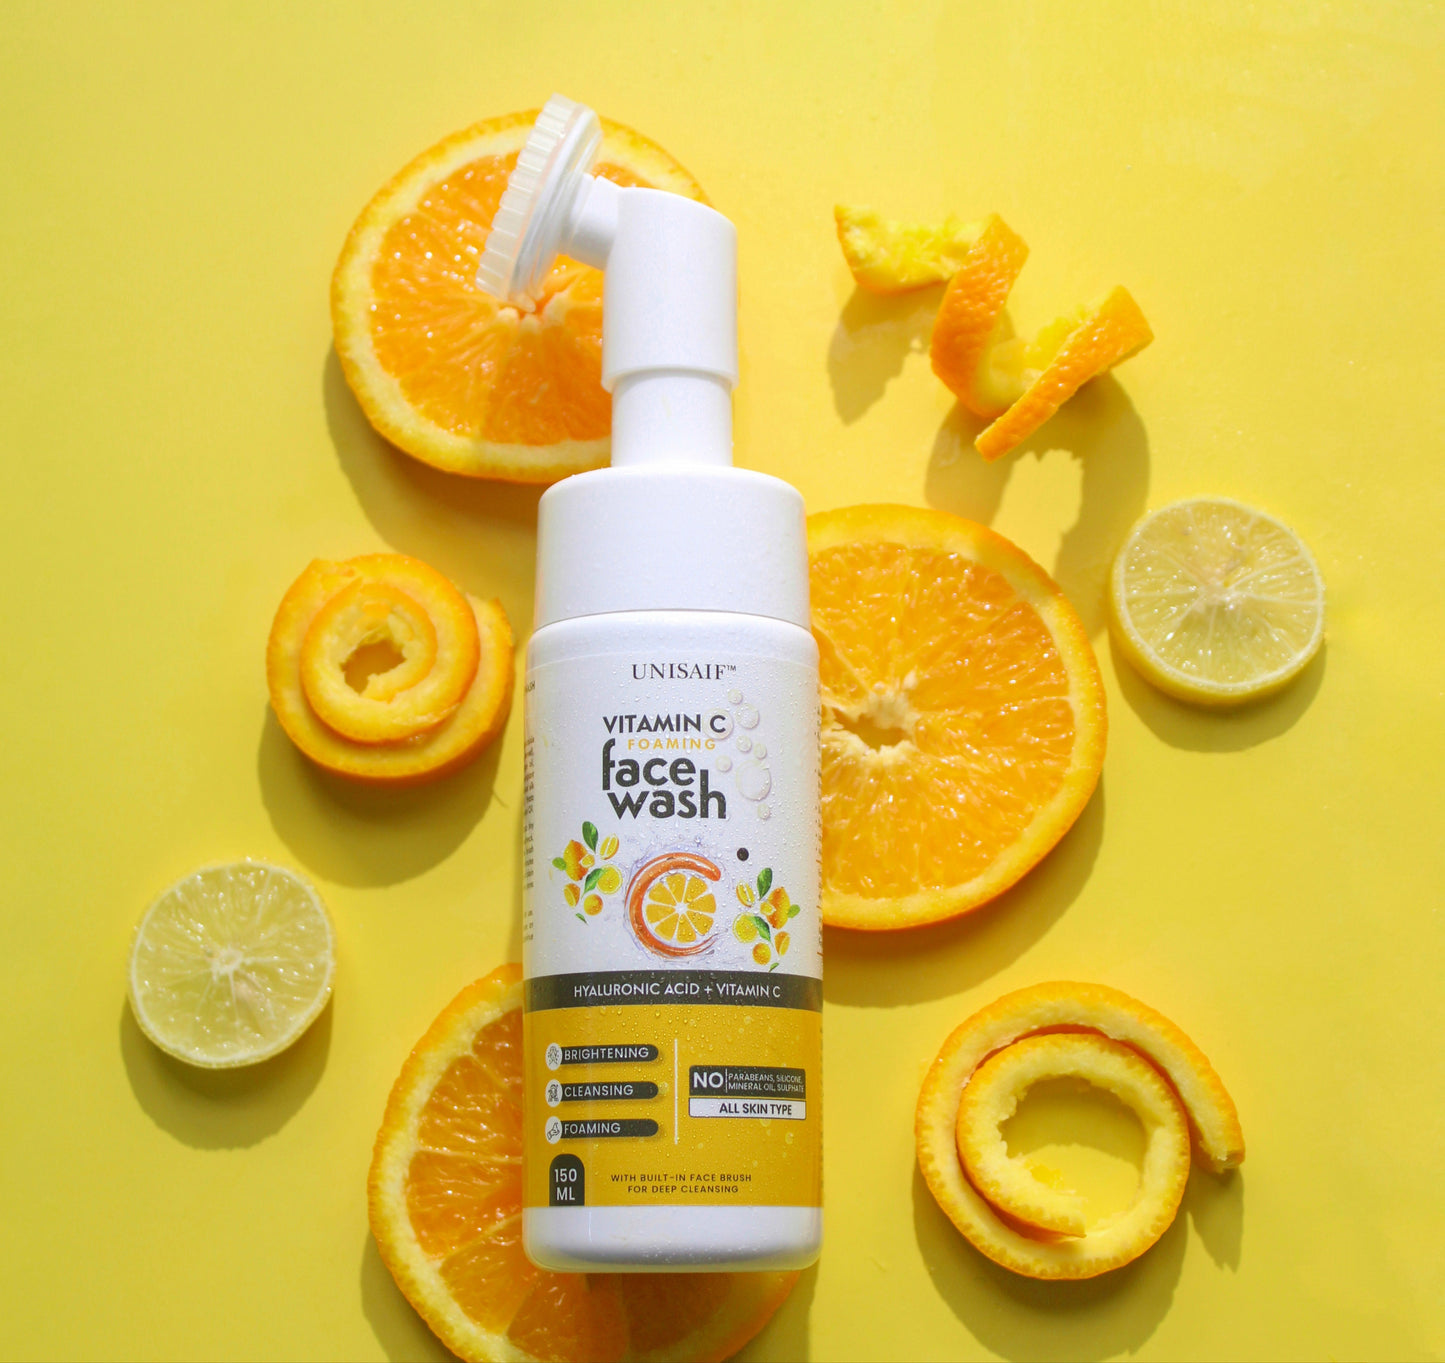 Vitamin C Organic Foaming Facewash (150ml) With Hyaluronic Acid |Brightening| Cleansing| Hydration| NO PARABEN| NO SULPHATE